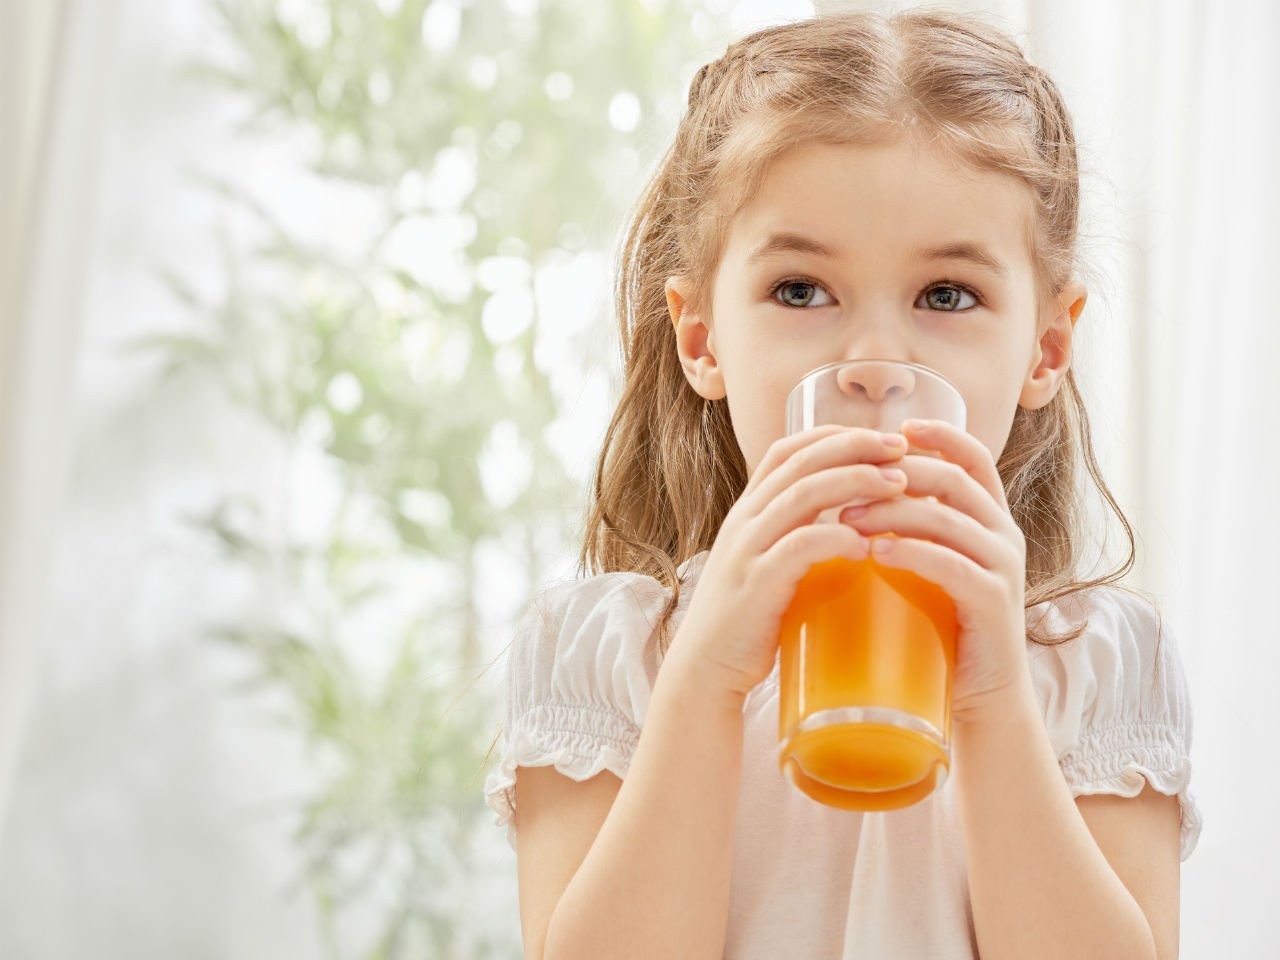 Jagdale’s nutrition drink Mulmina shows positive results in boosting children’s immunity